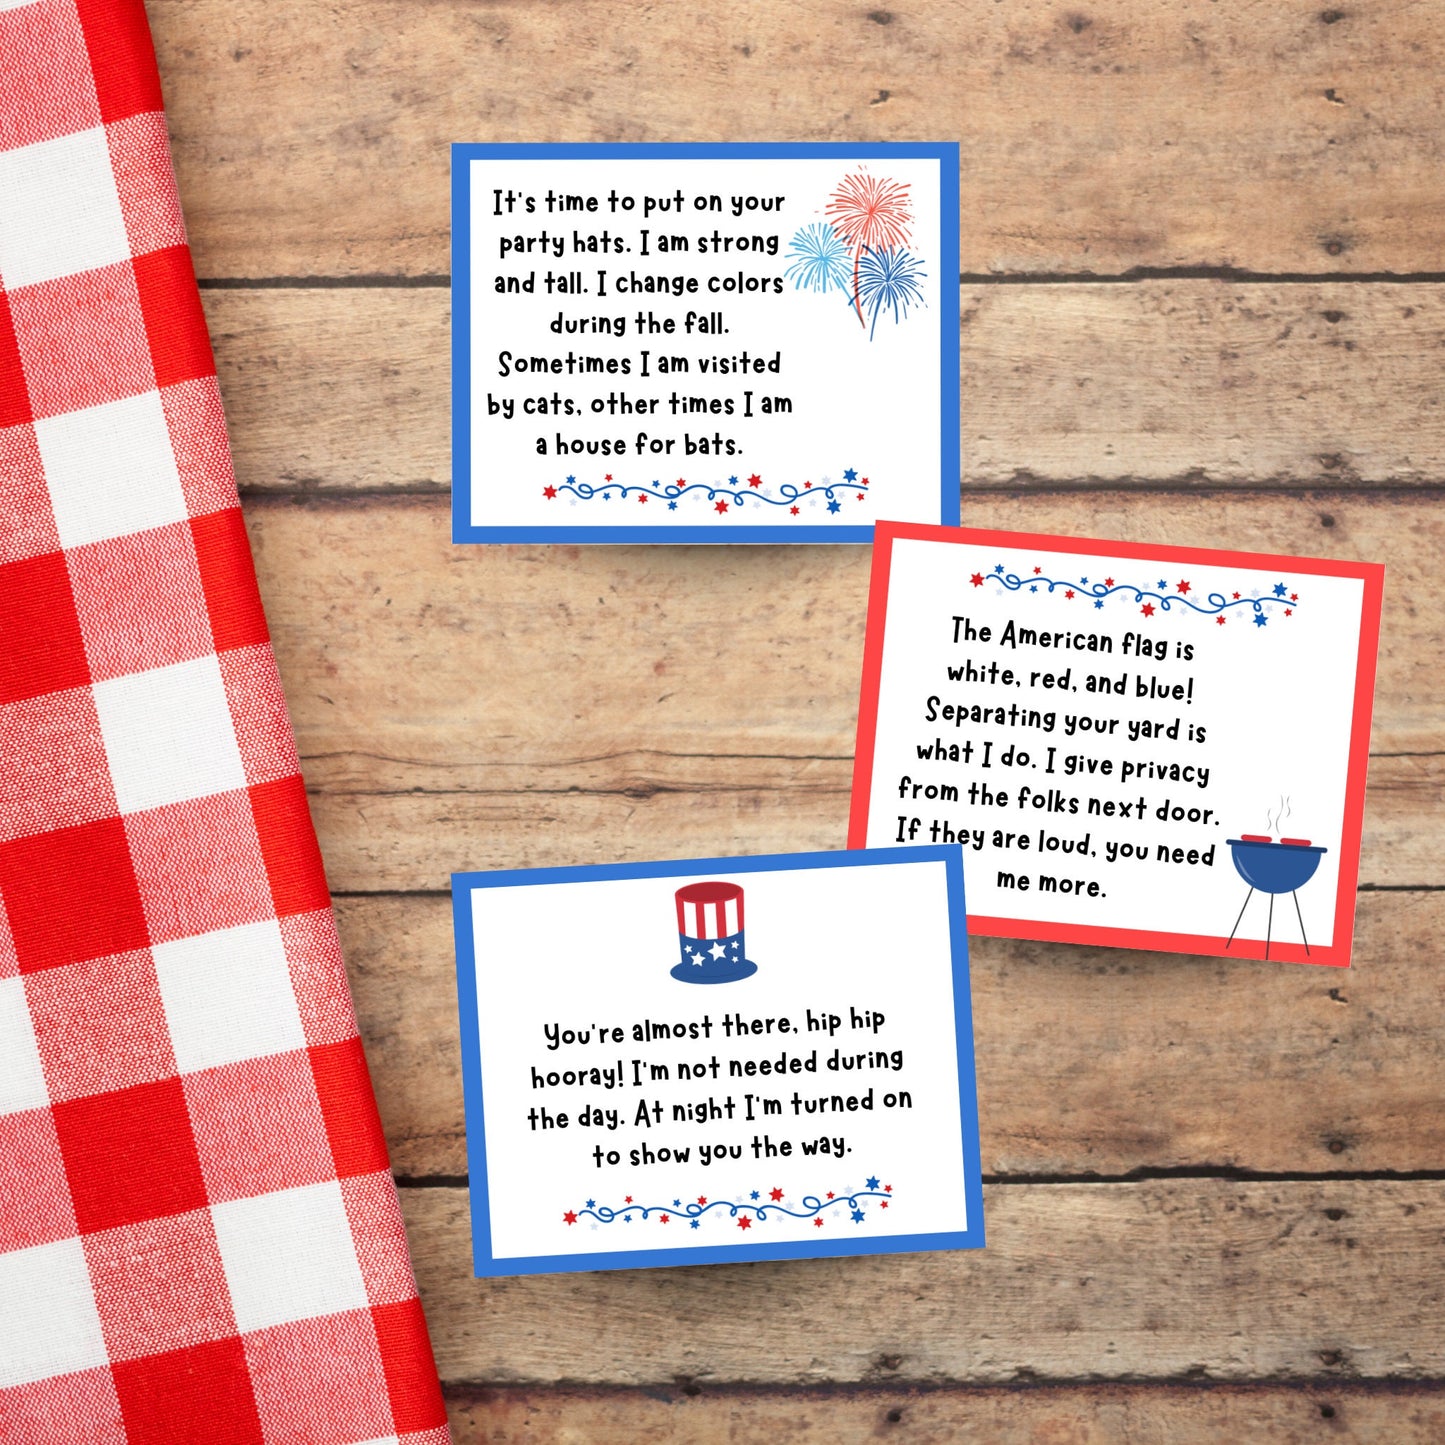 4th of July Treasure Hunt Printable, Outdoor Scavenger Hunt Clues for Kids, Independence Day Party Games, Tween Teen Summer Family Activity